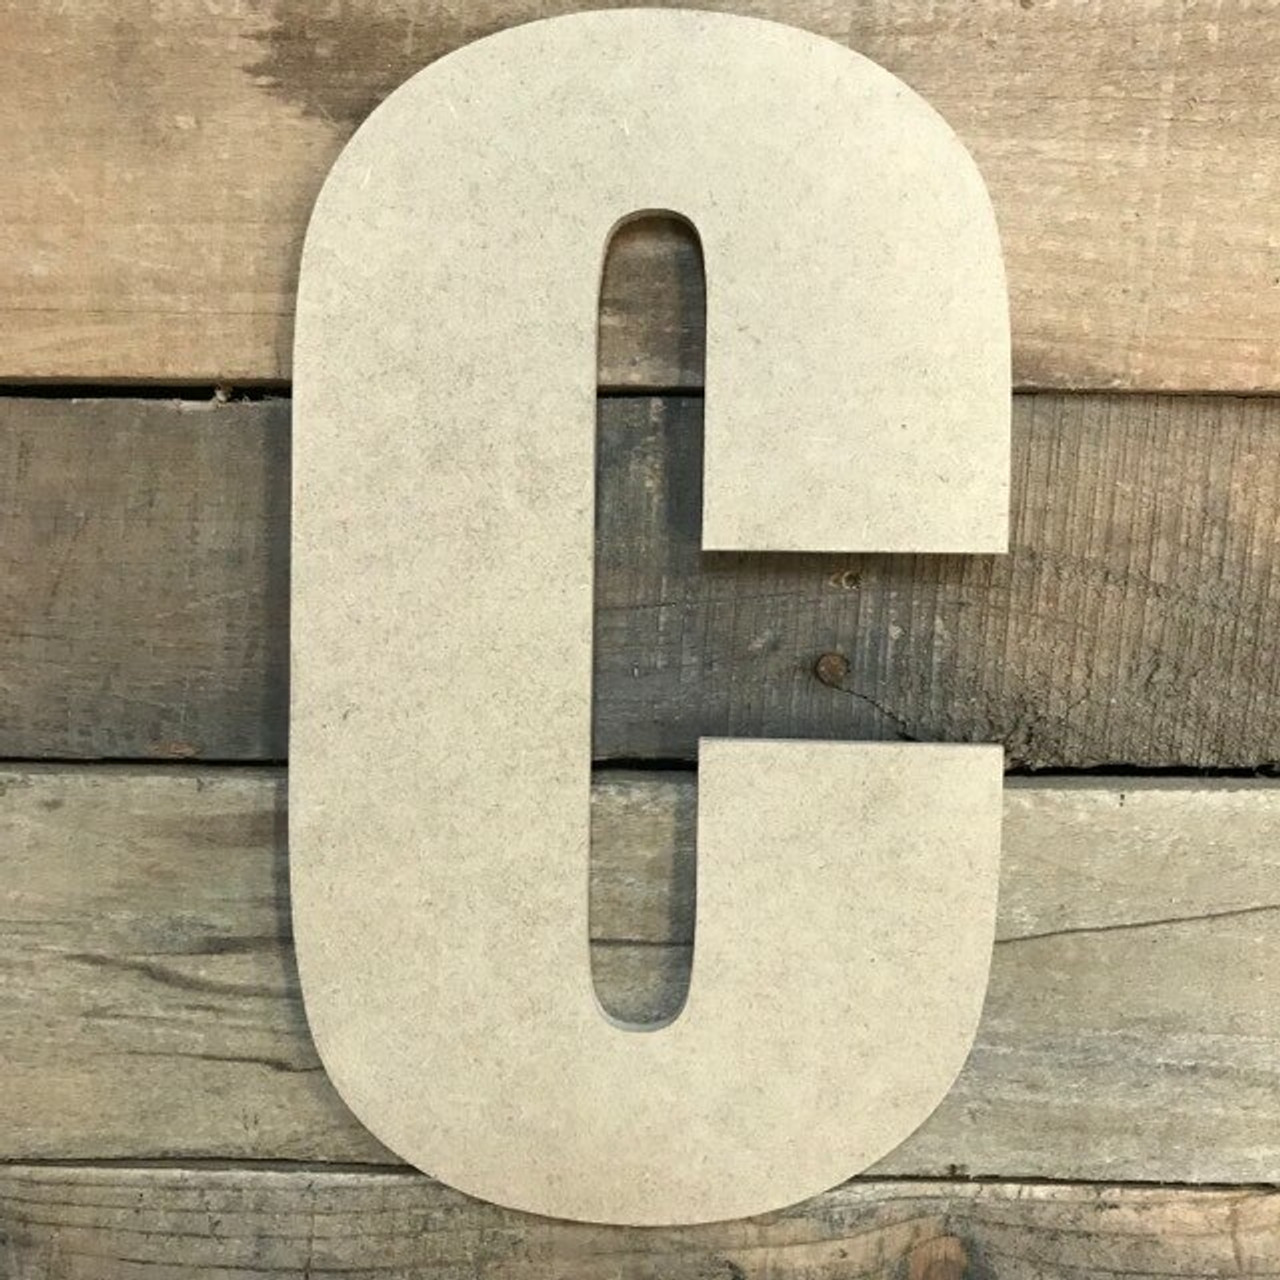 Custom Large Toy 3D Wooden Block Letter Wall Decor DIY -   Wooden block  letters, Letter wall decor, Letter wall decor diy